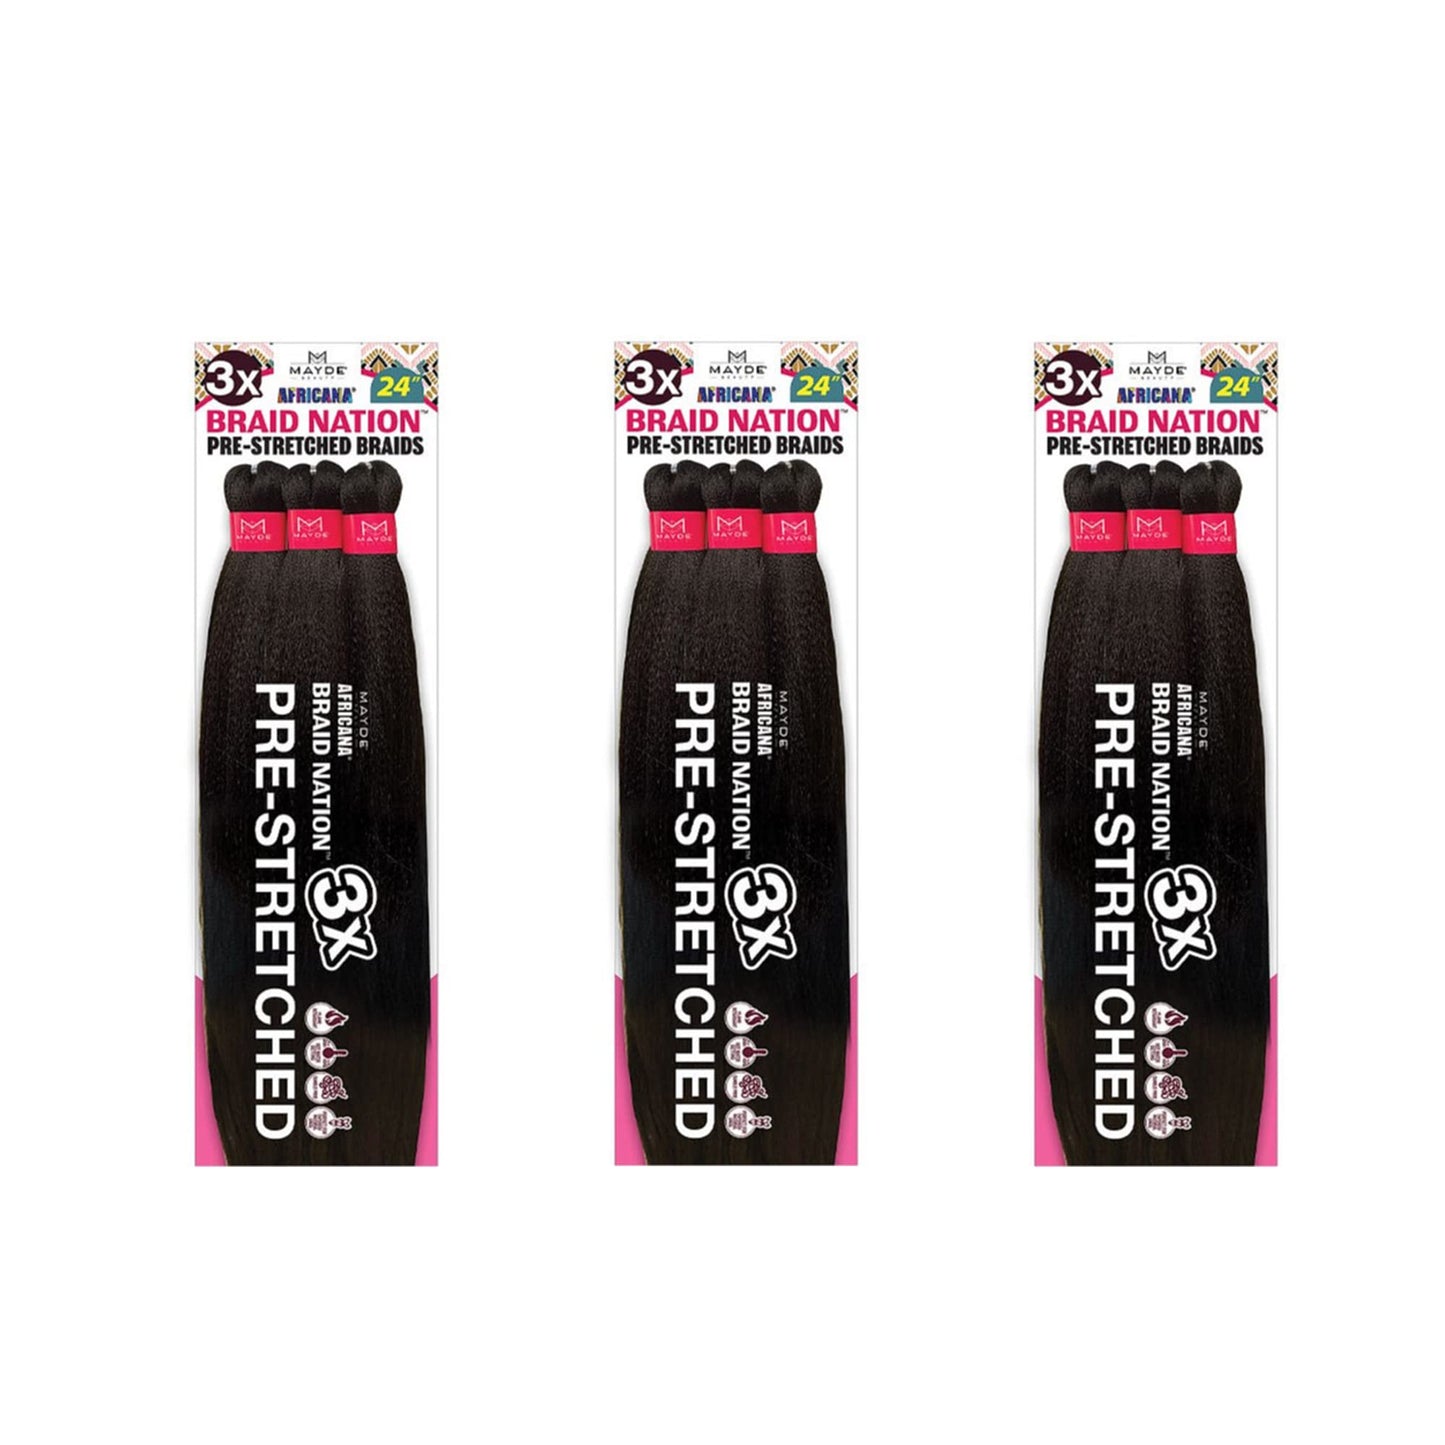 Mayde Beauty Pre-Stretched Braiding Hair Africana 3X BRAID NATION 24" (3-Pack, 4)